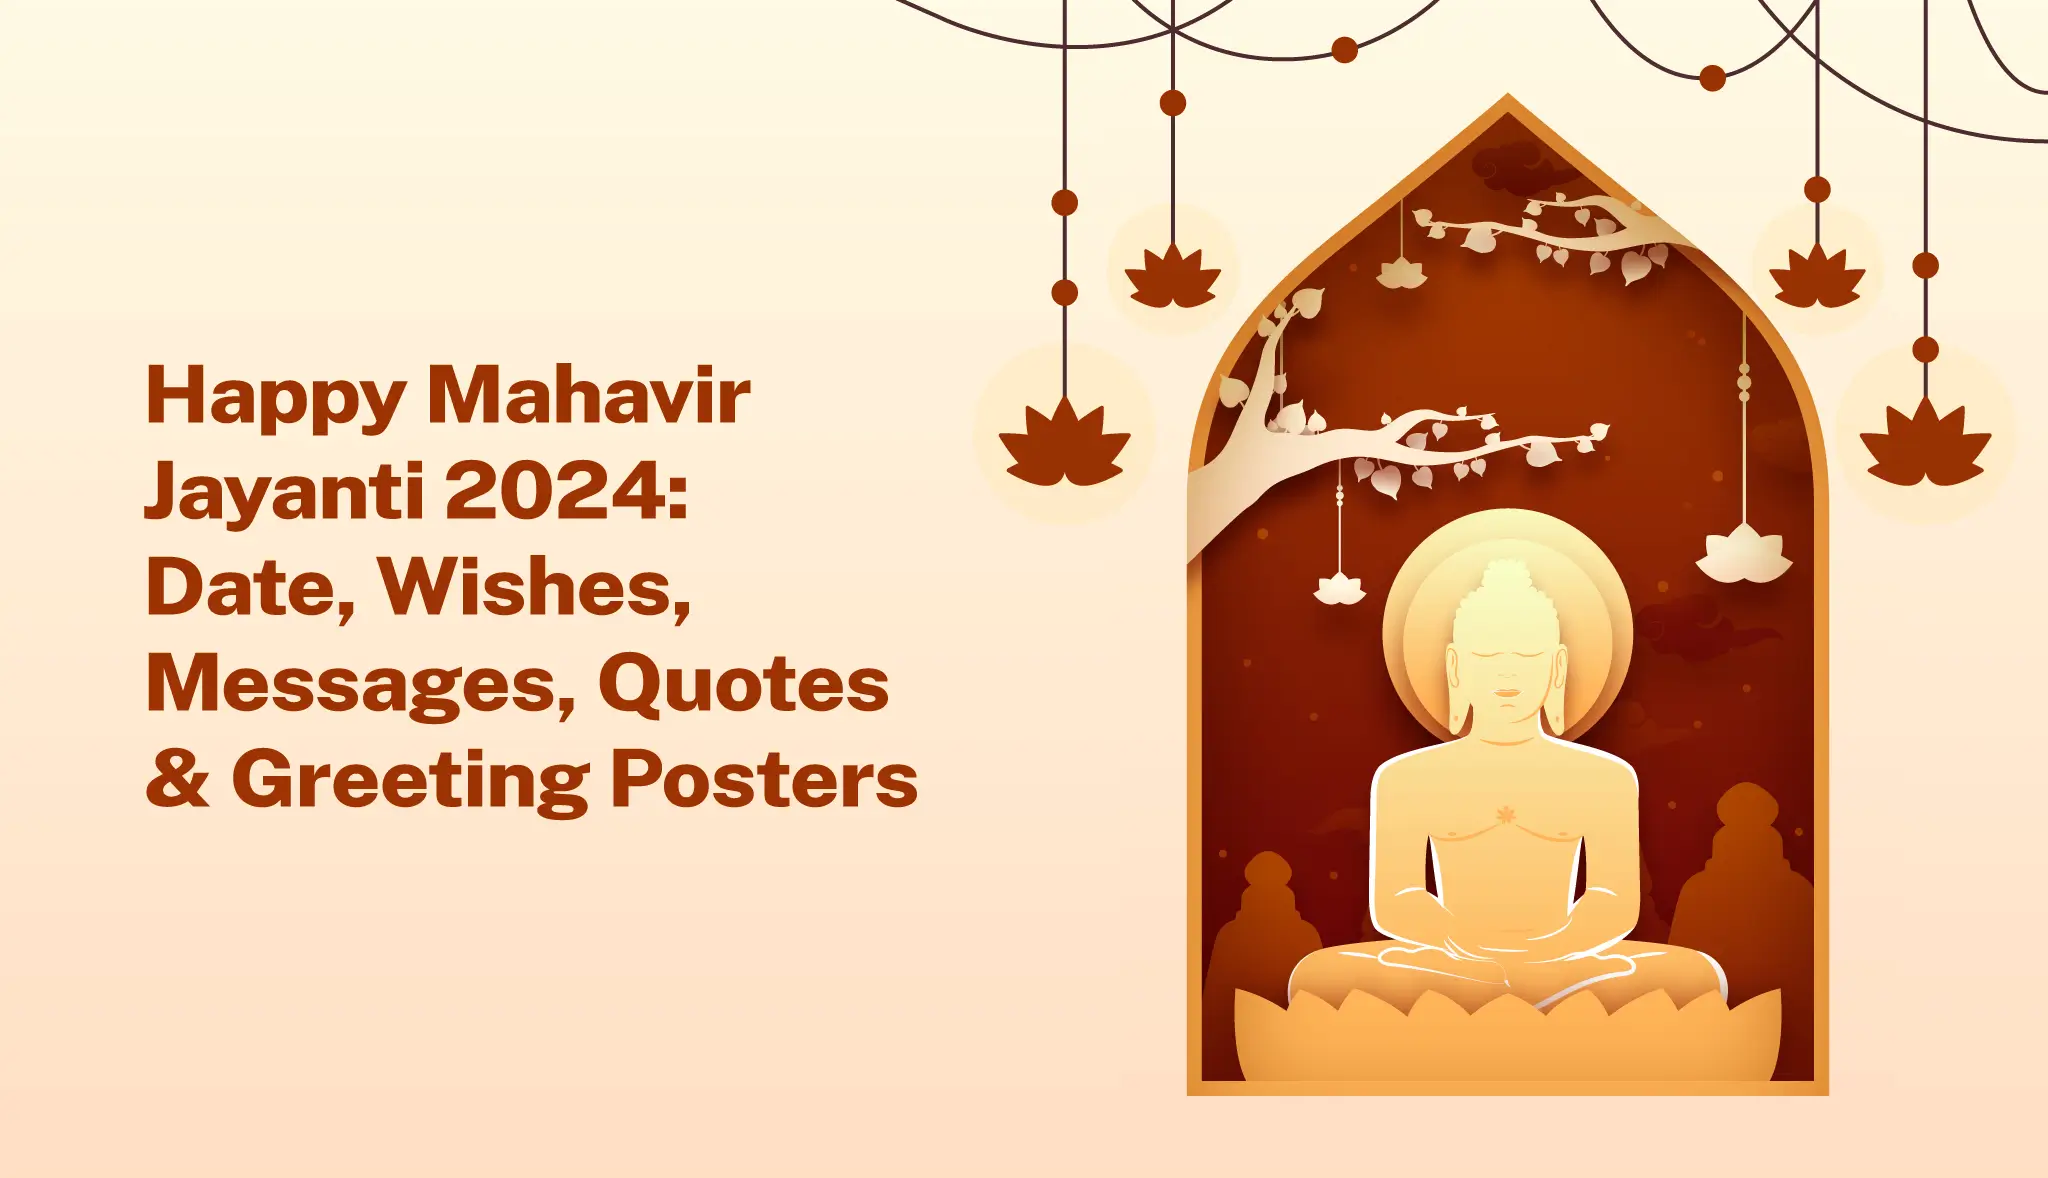 Mahavir Jayanti 2024: Wishes, Messages, Quotes & Posters - Postive